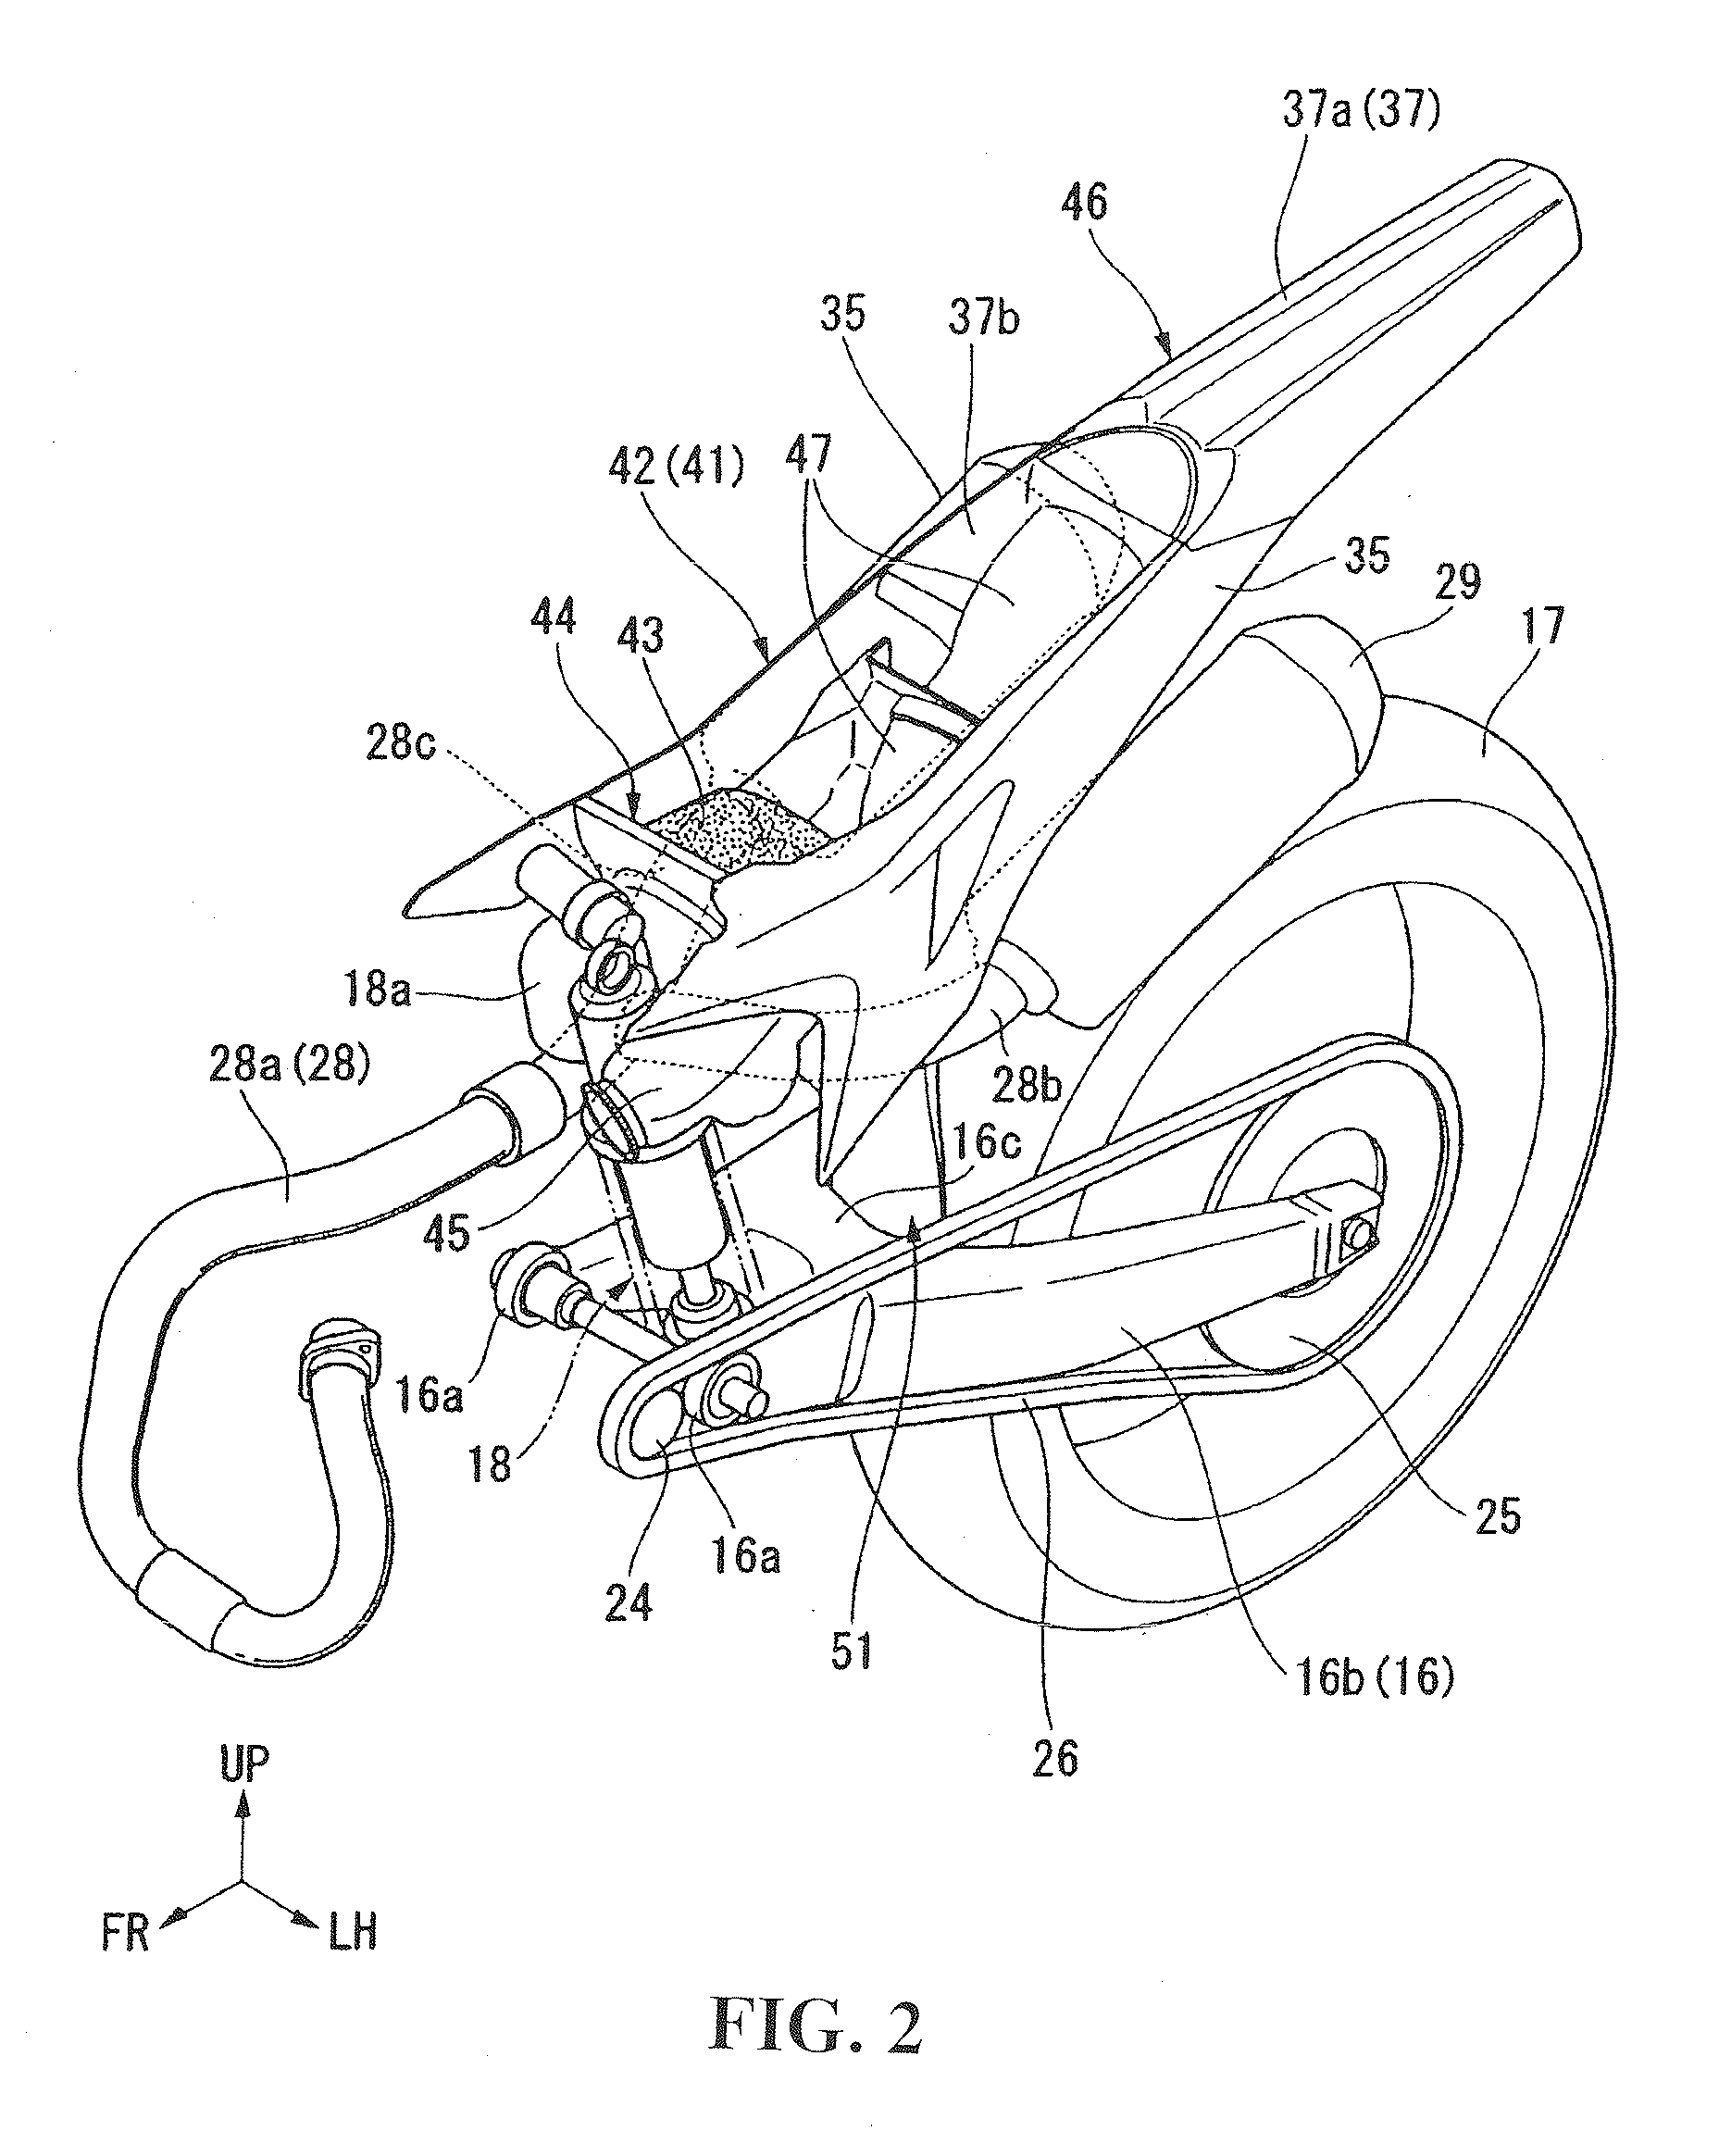 Mudguard structure for straddle-ride type vehicle